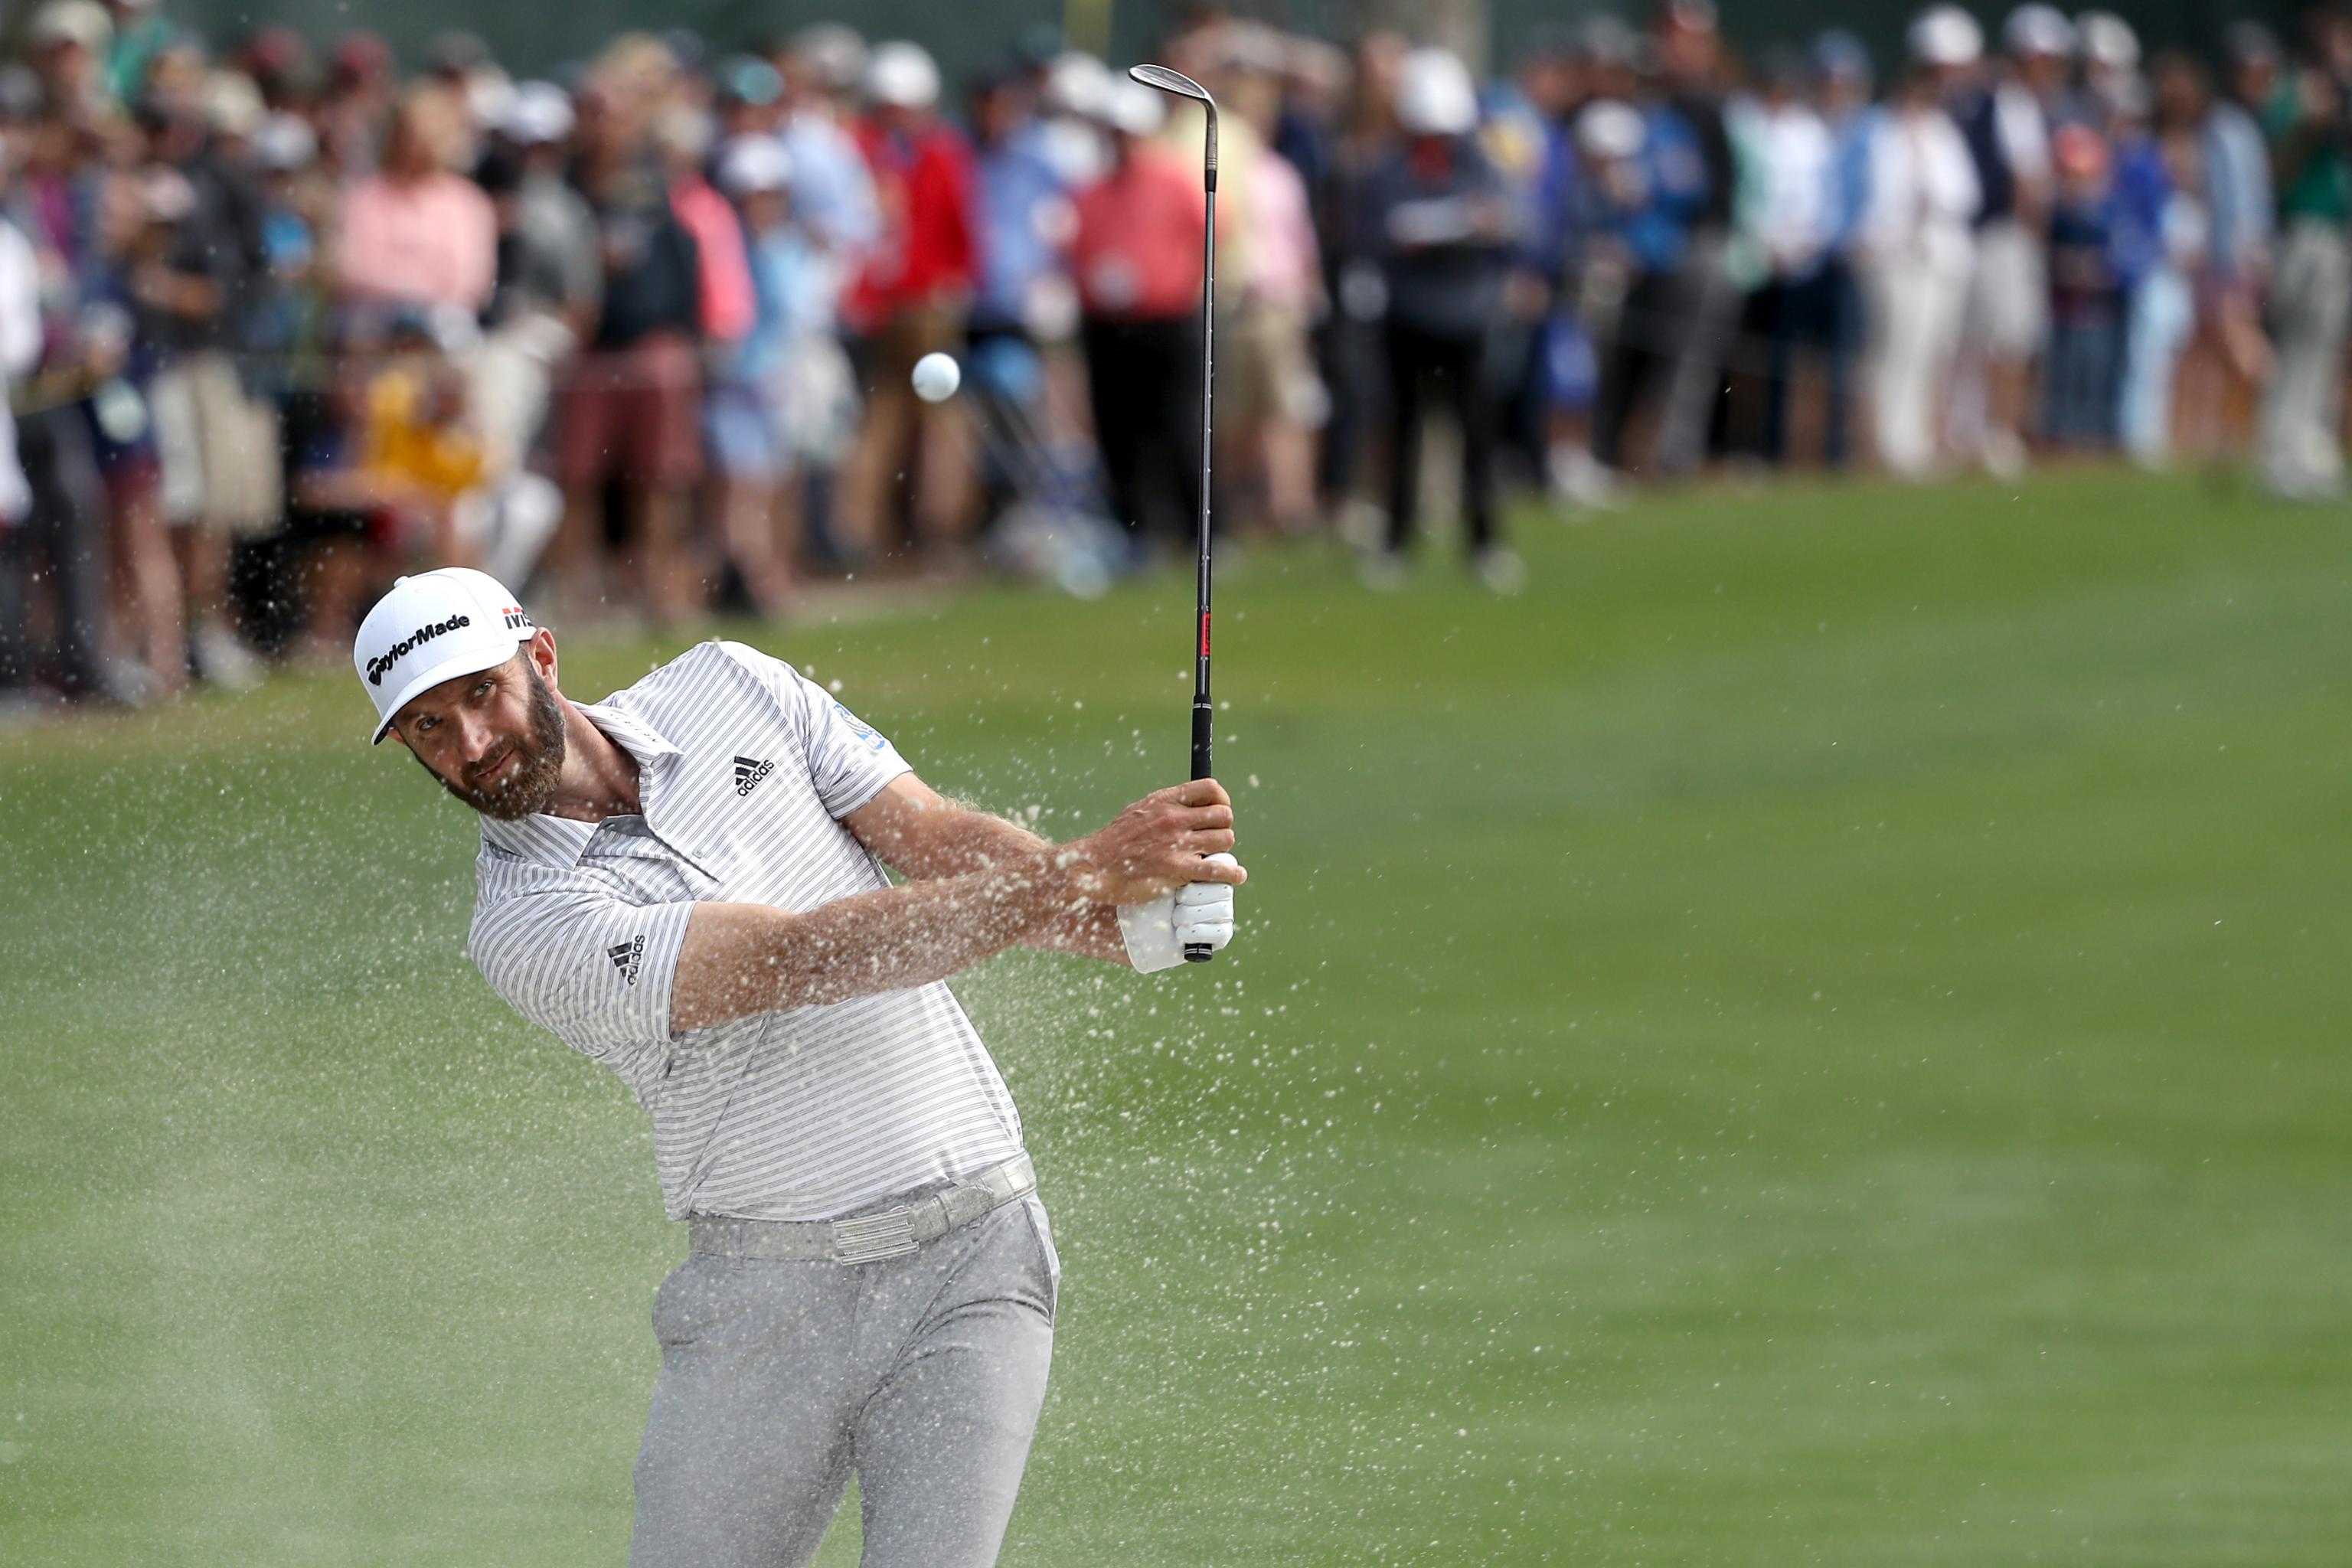 Could Masters Hangover Be Cause for Dustin Johnson Collapse at RBC Heritage